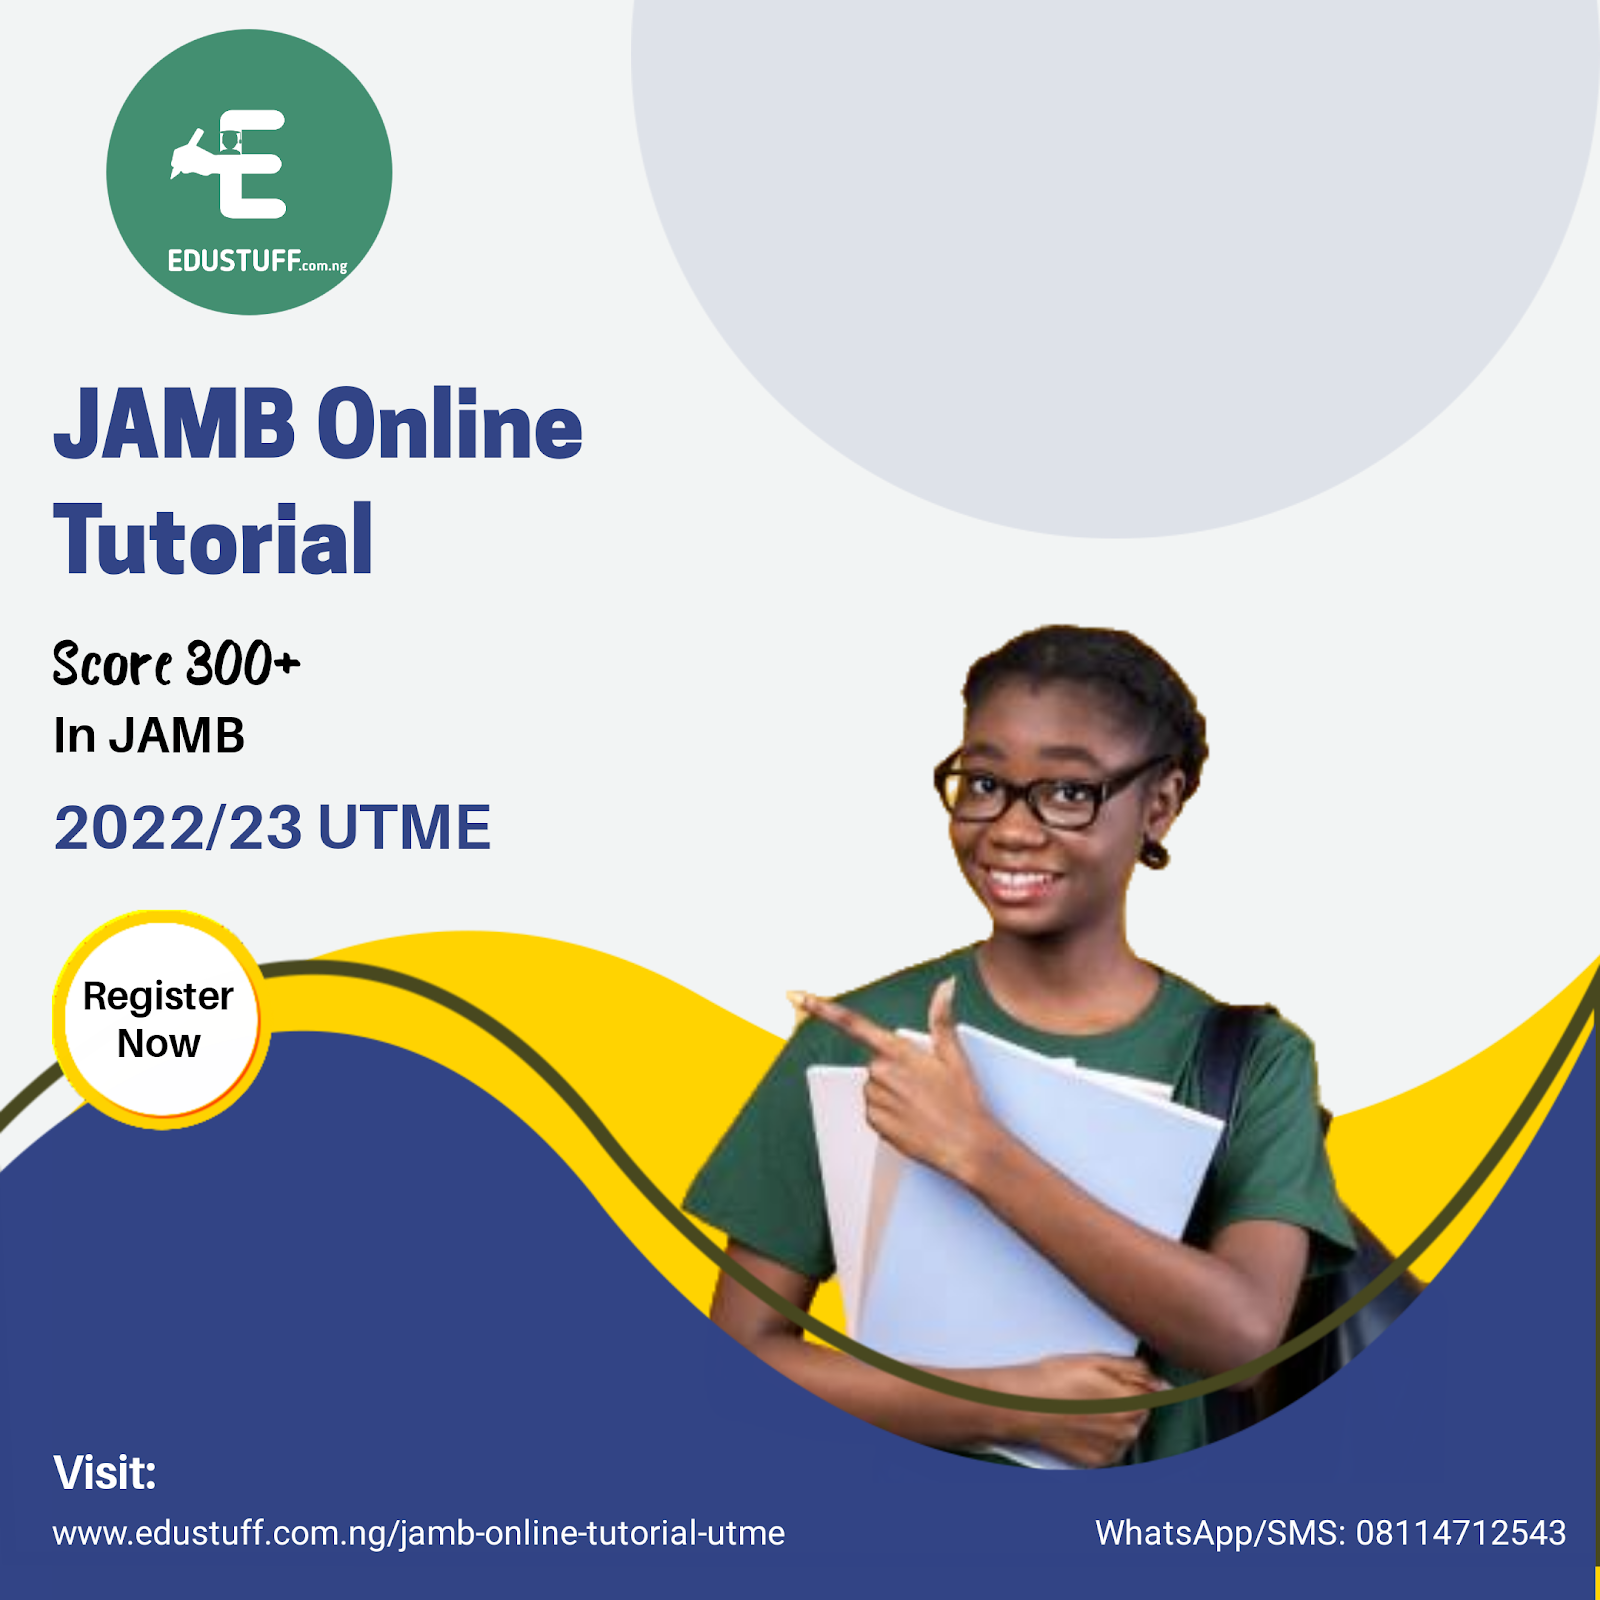 JAMB Online Tutorial for UTME Candidates